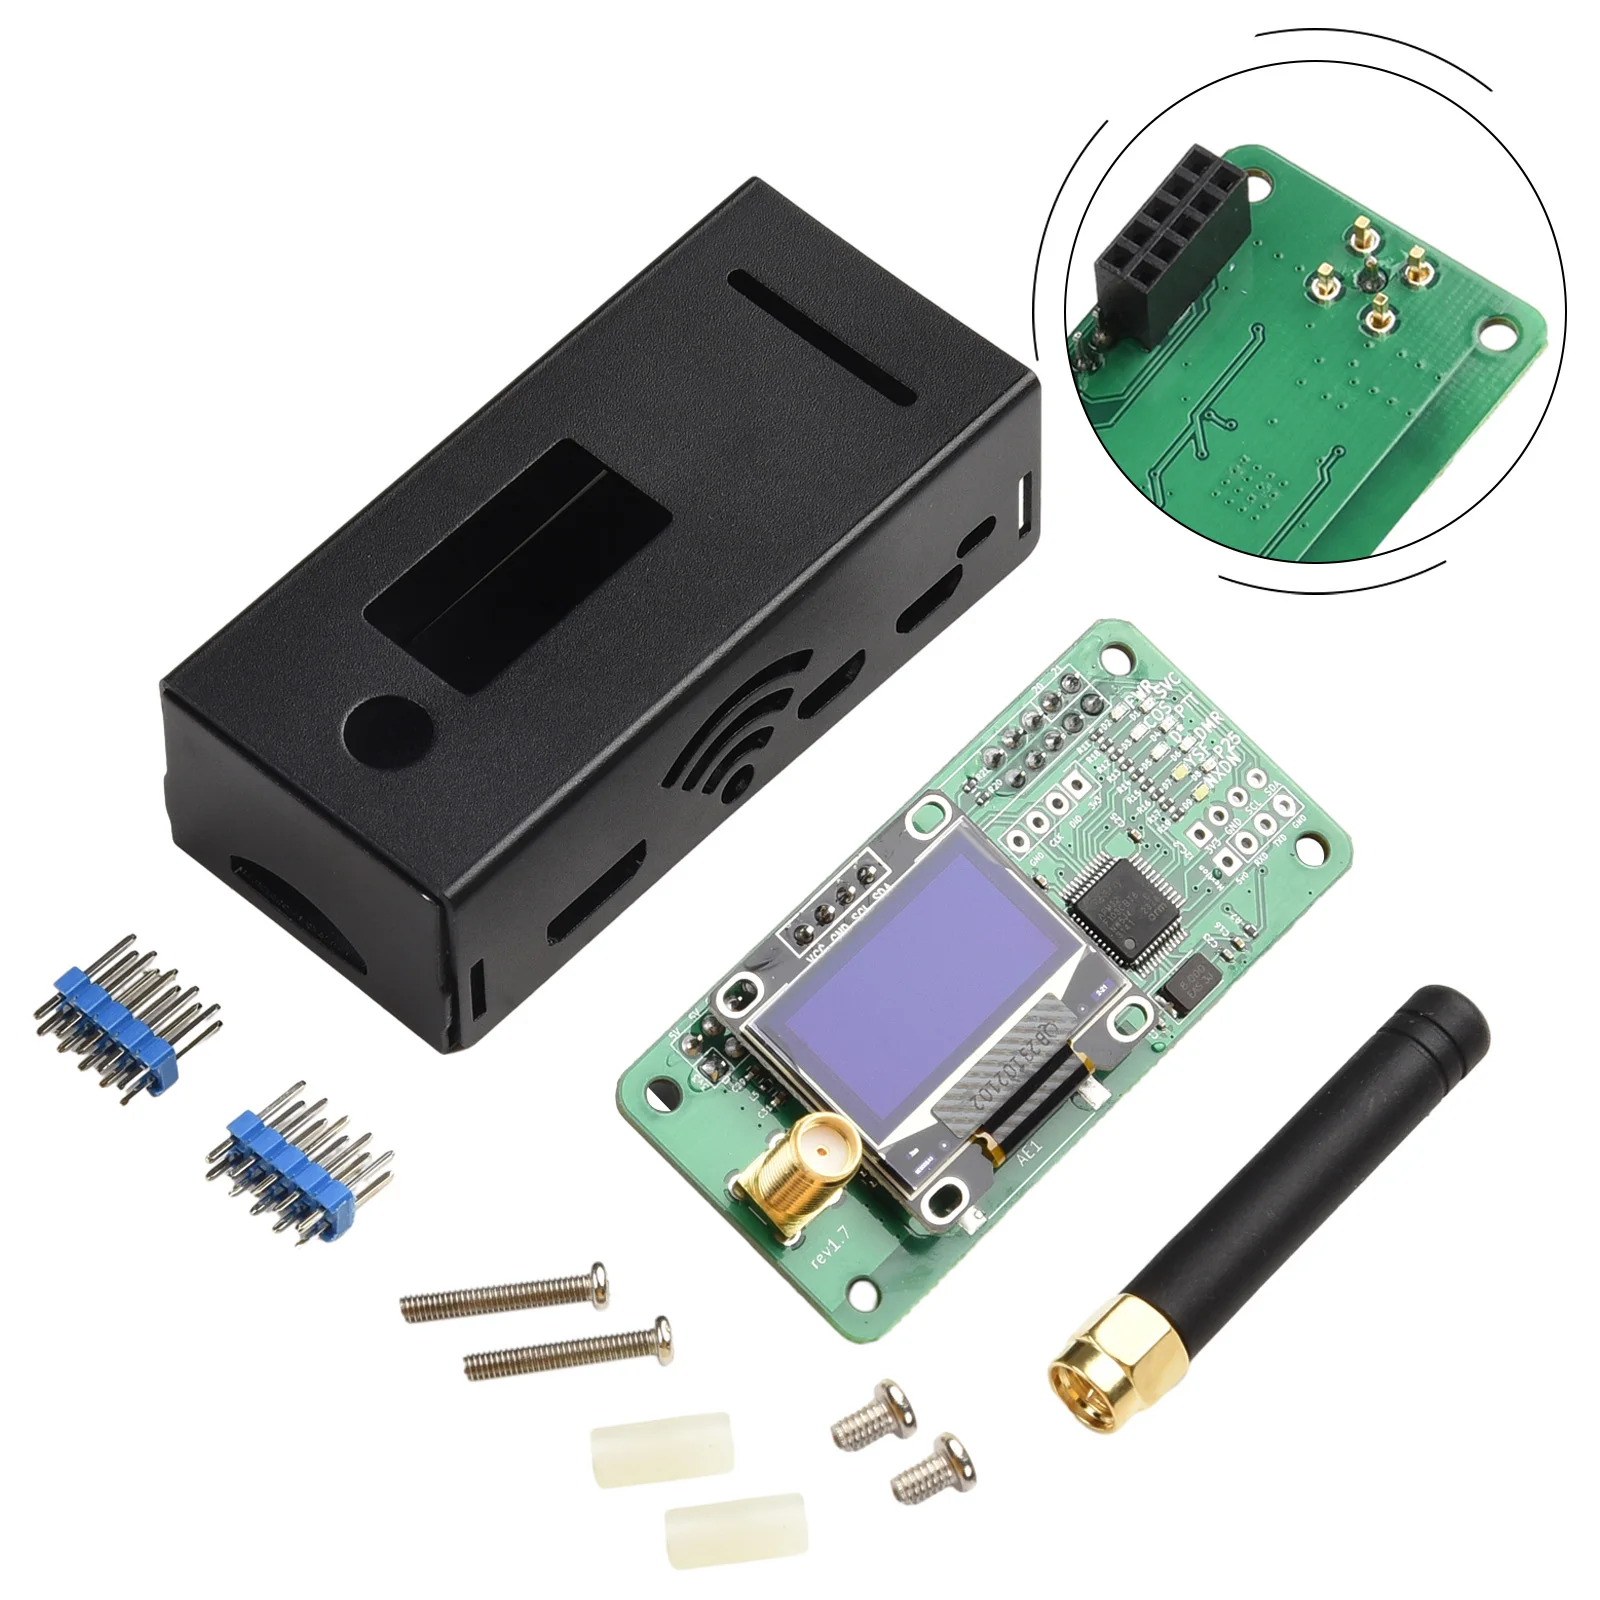 

Parctical Hotspot Module Kit 32-bit AR M Processor Antenna For DMR P25 For Mmdvm High Performance With OLED Screen